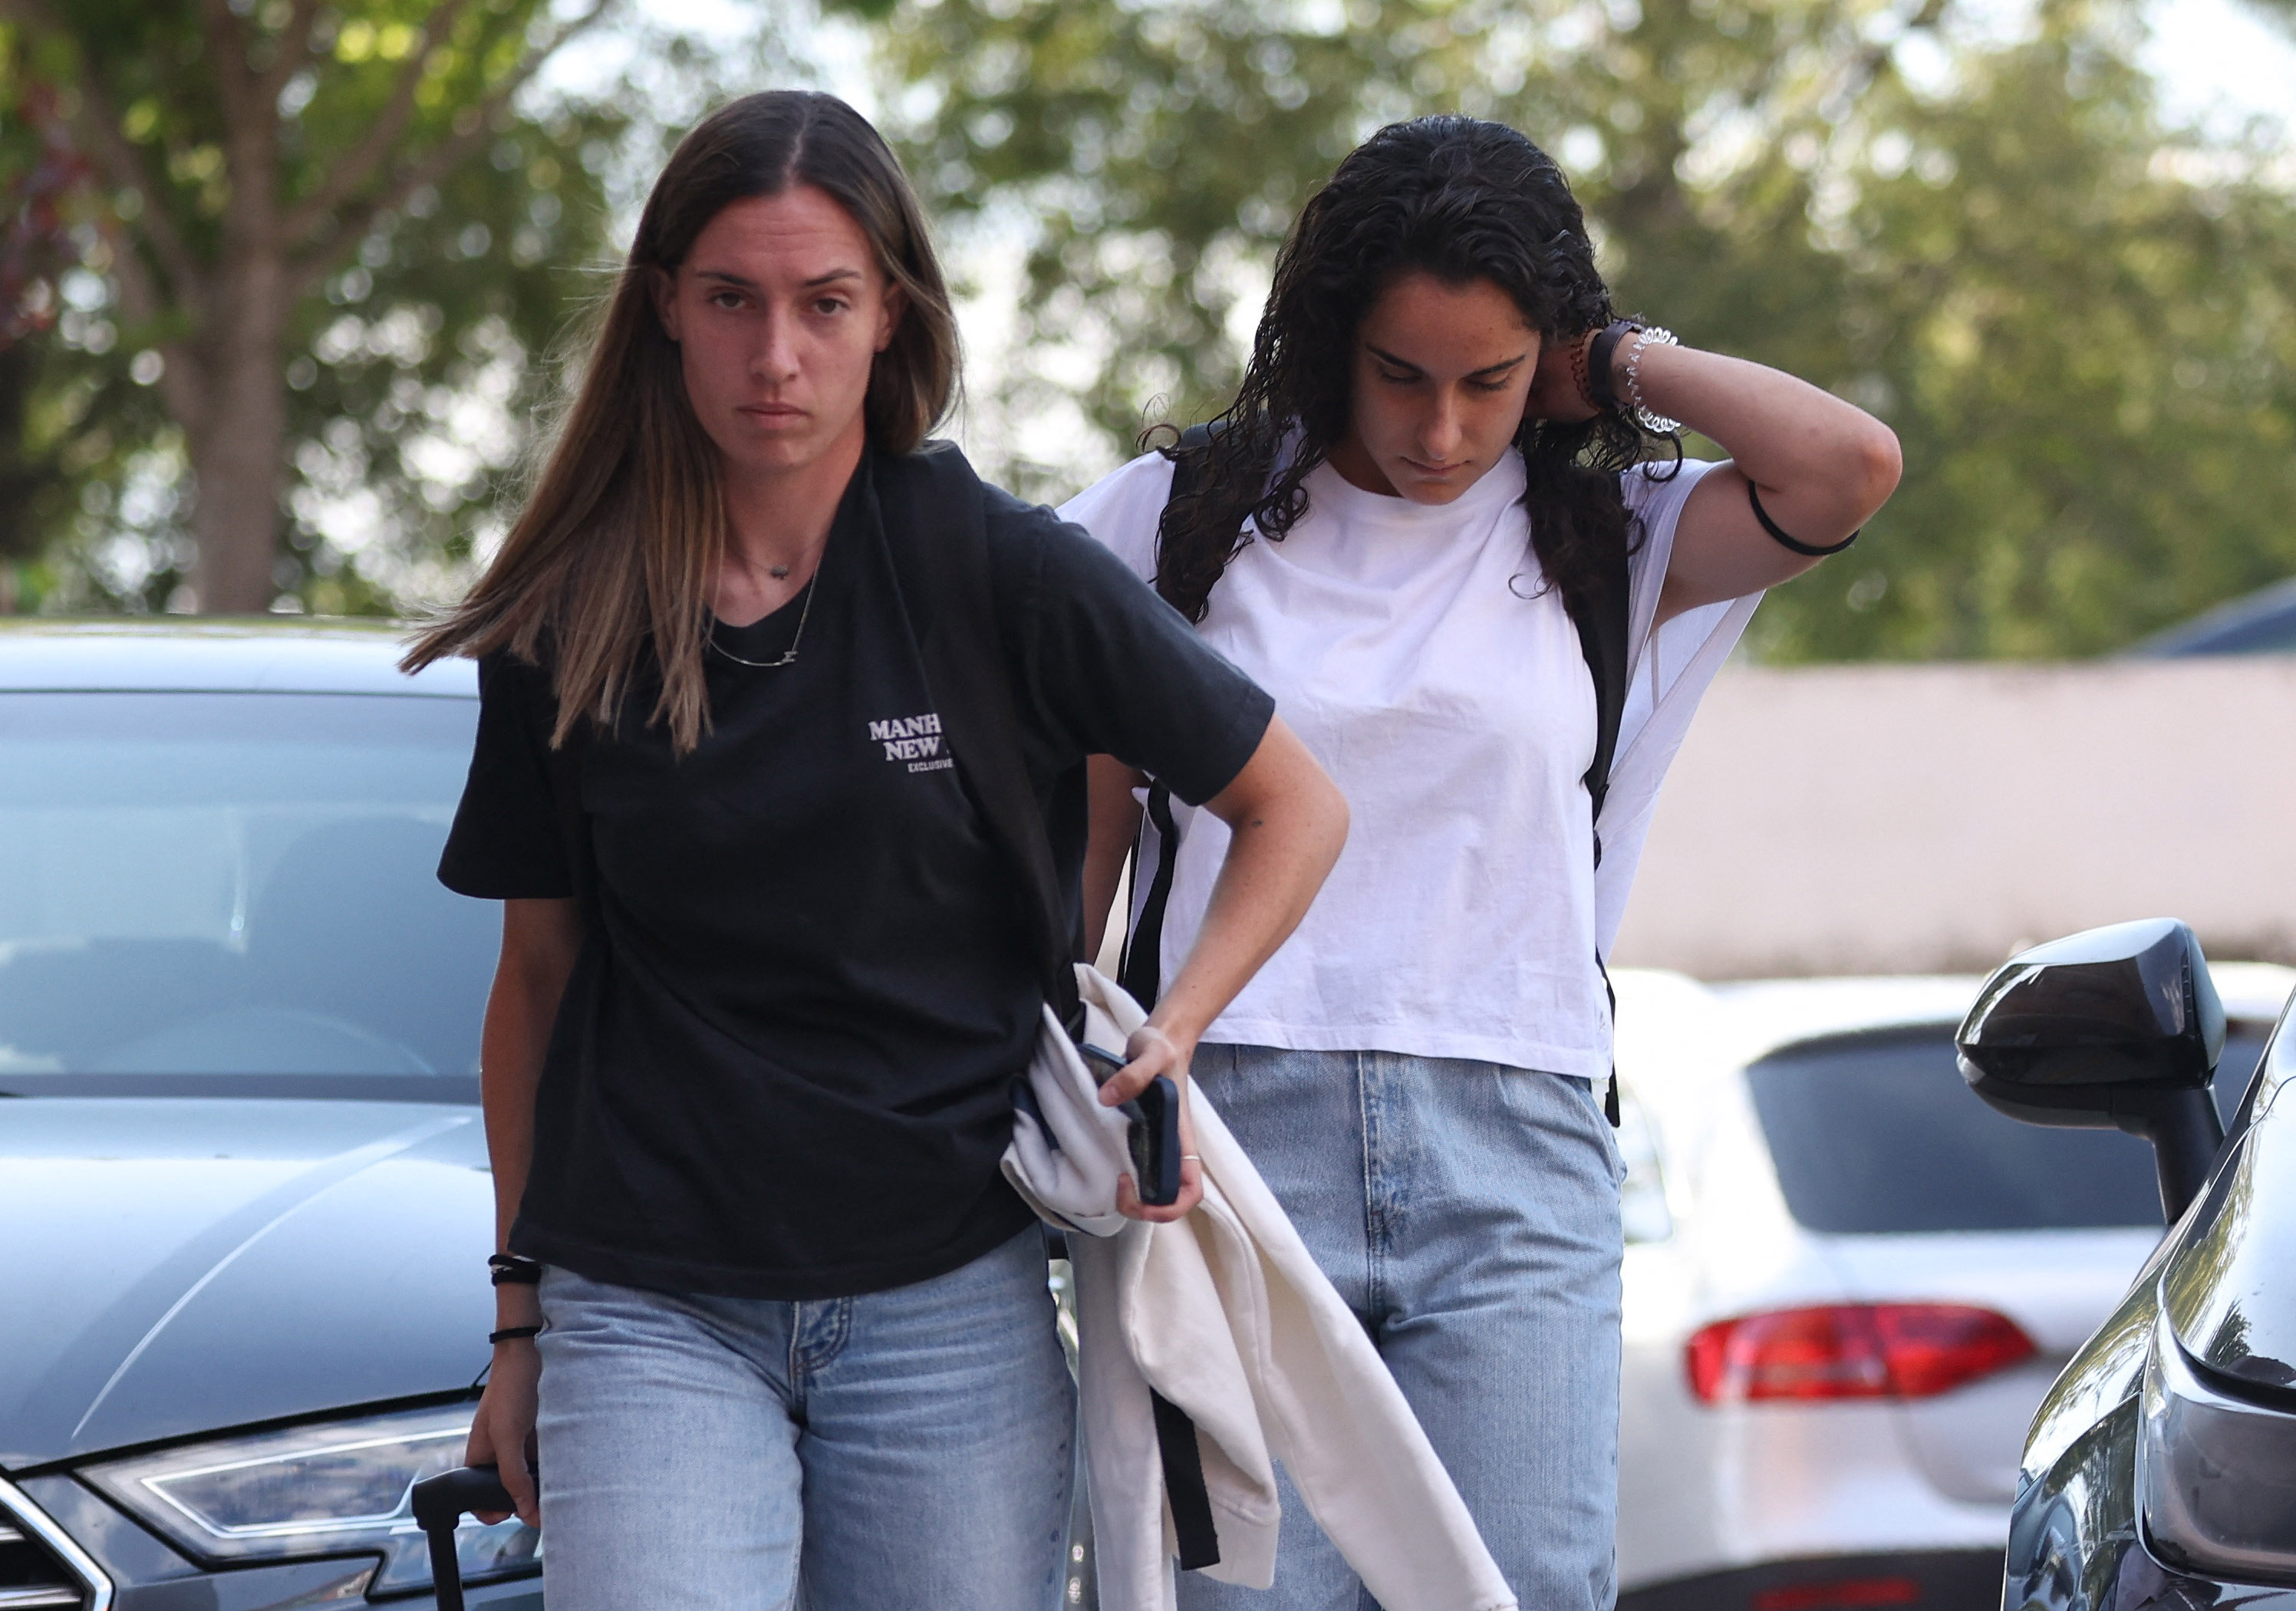 Players arrive at Spanish WNT camp under threat of sanctions 09/20